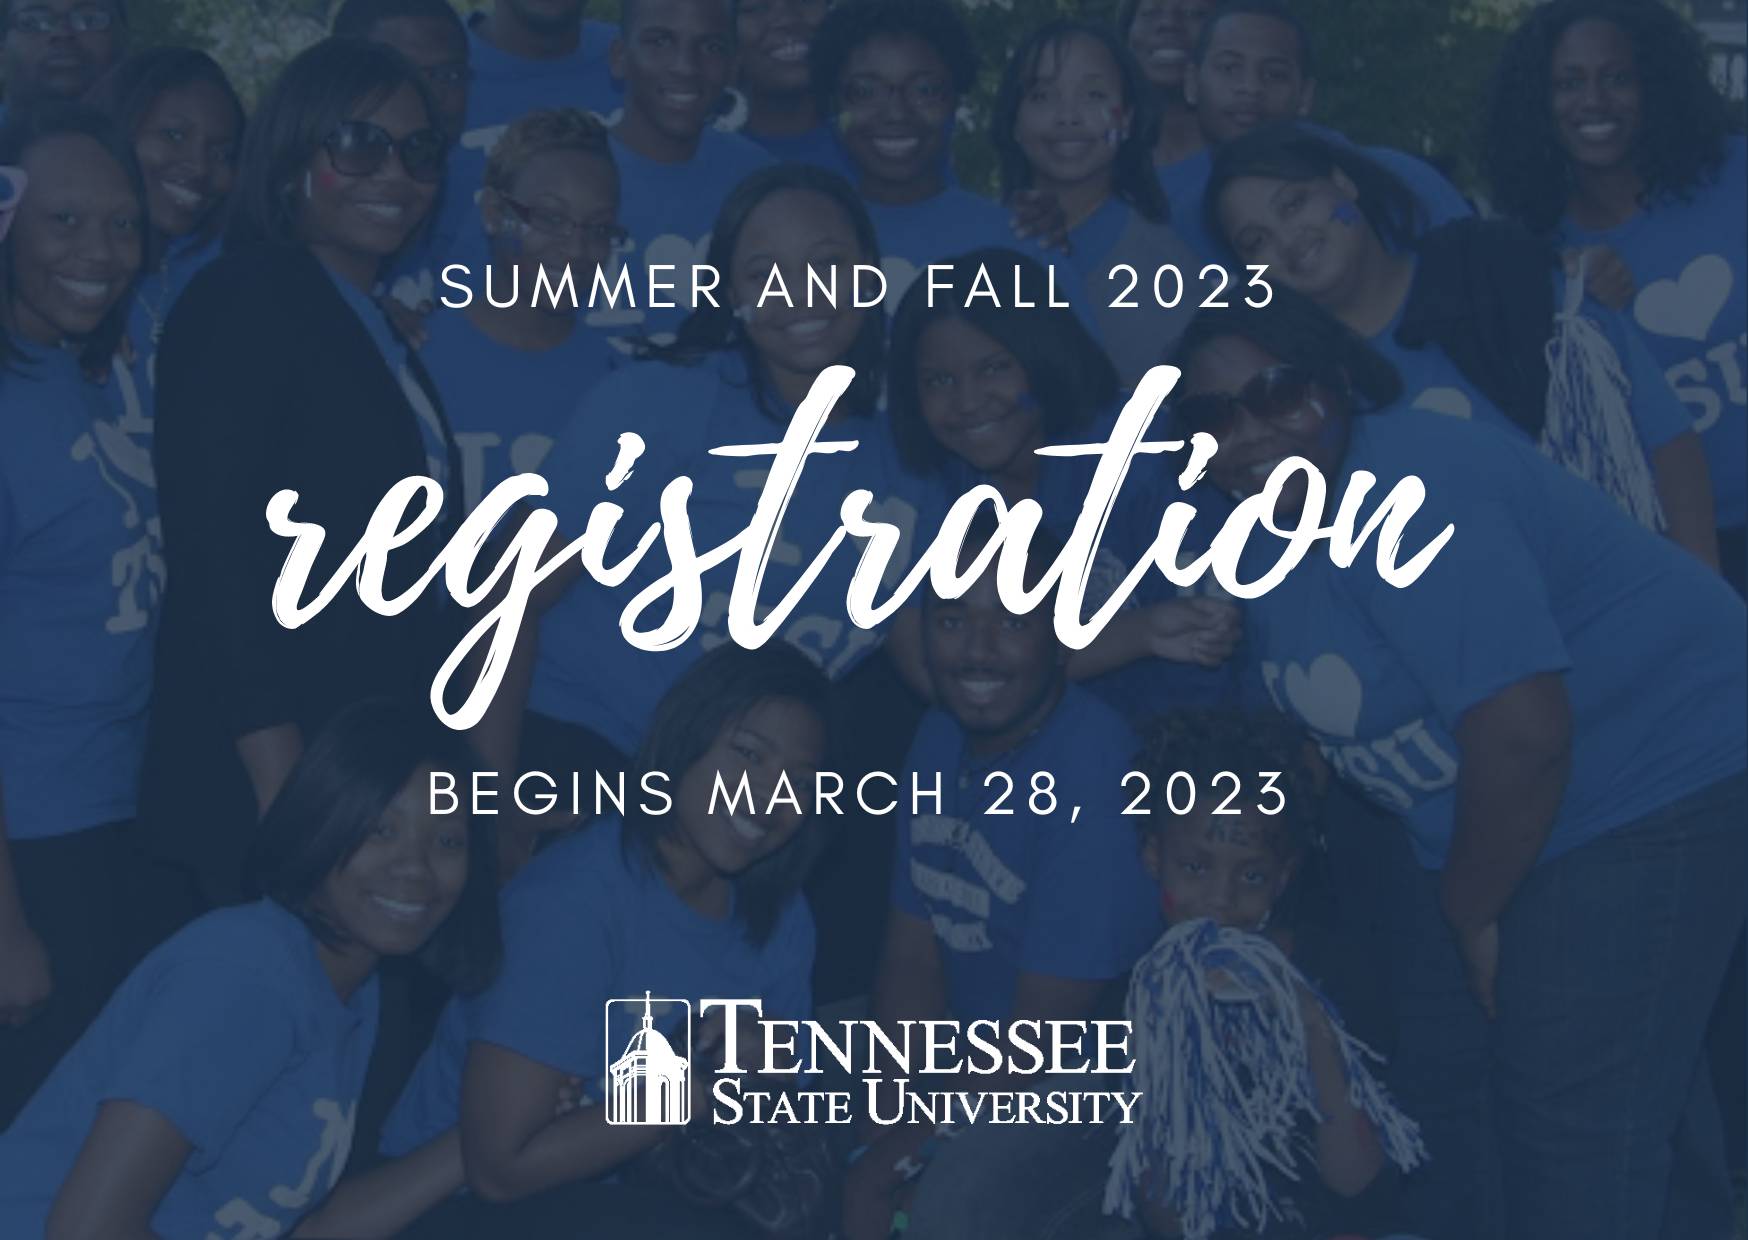 Summer and Fall 2023 Registration